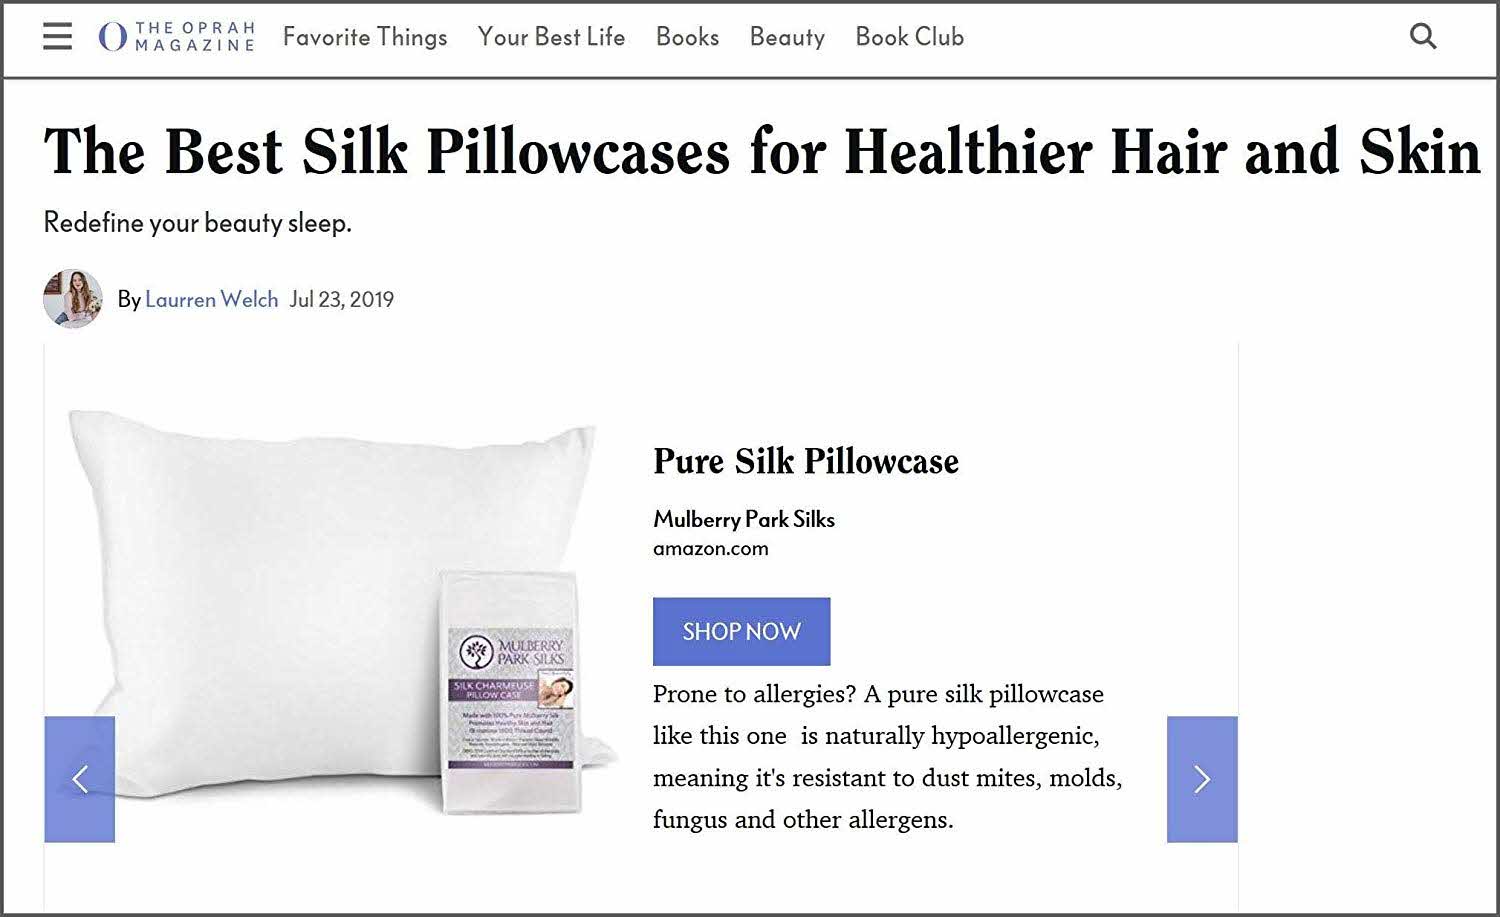 Oprah Magazine Names Mulberry Park Silks pillow case among the Best Silk Pillowcases for Healthier Hair and Skin